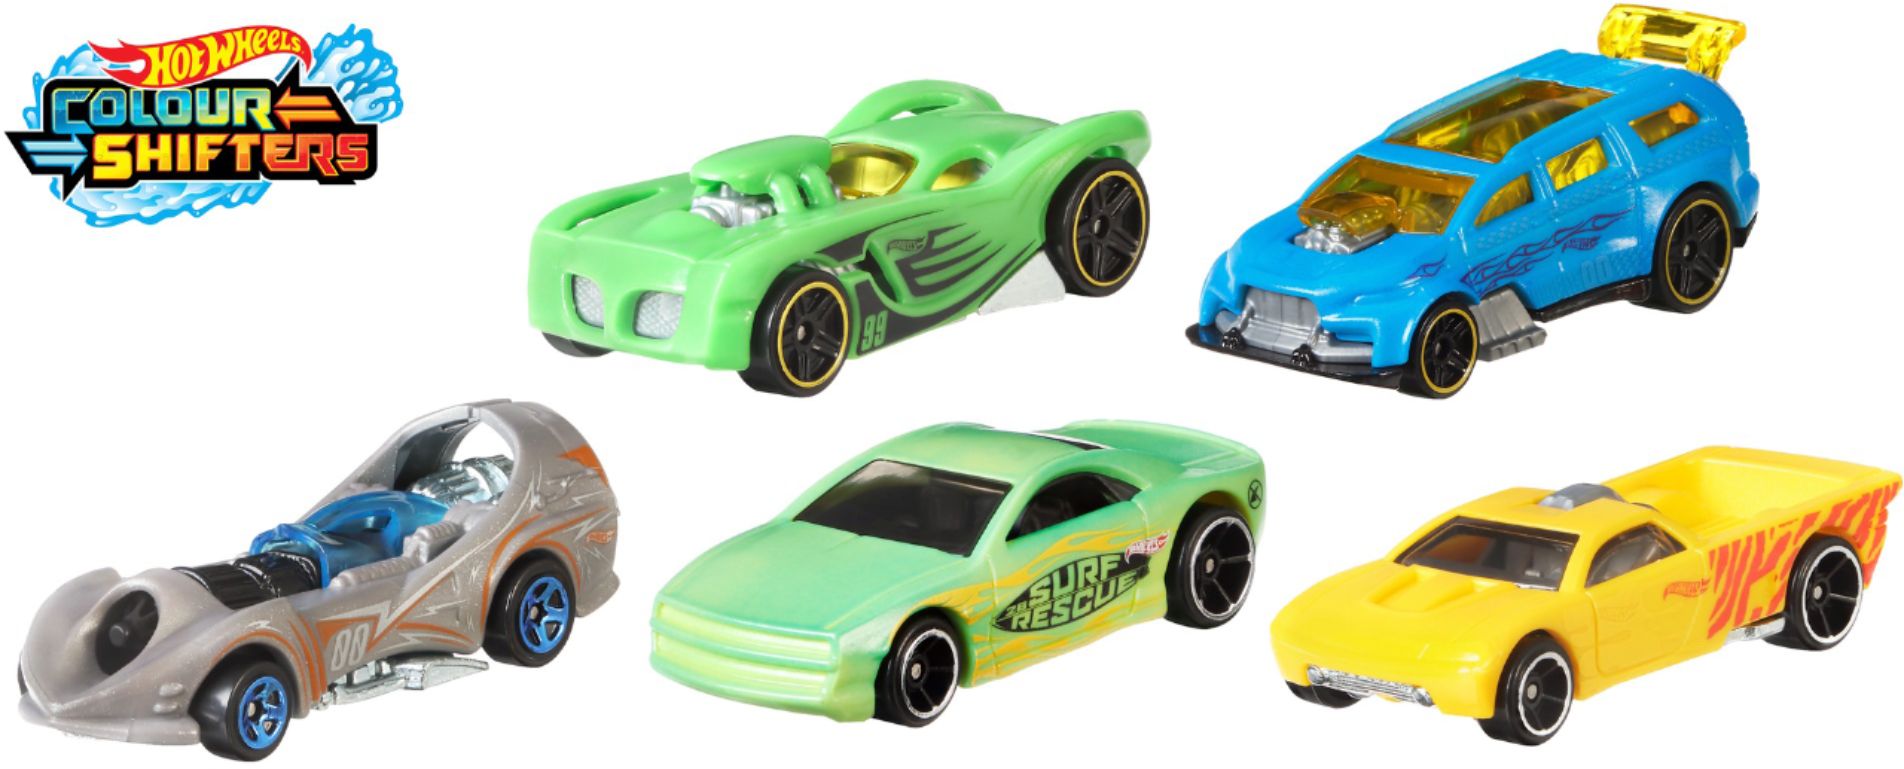 Hot Wheels Color Shifters Colour Changing Cars - Choose your vehicle